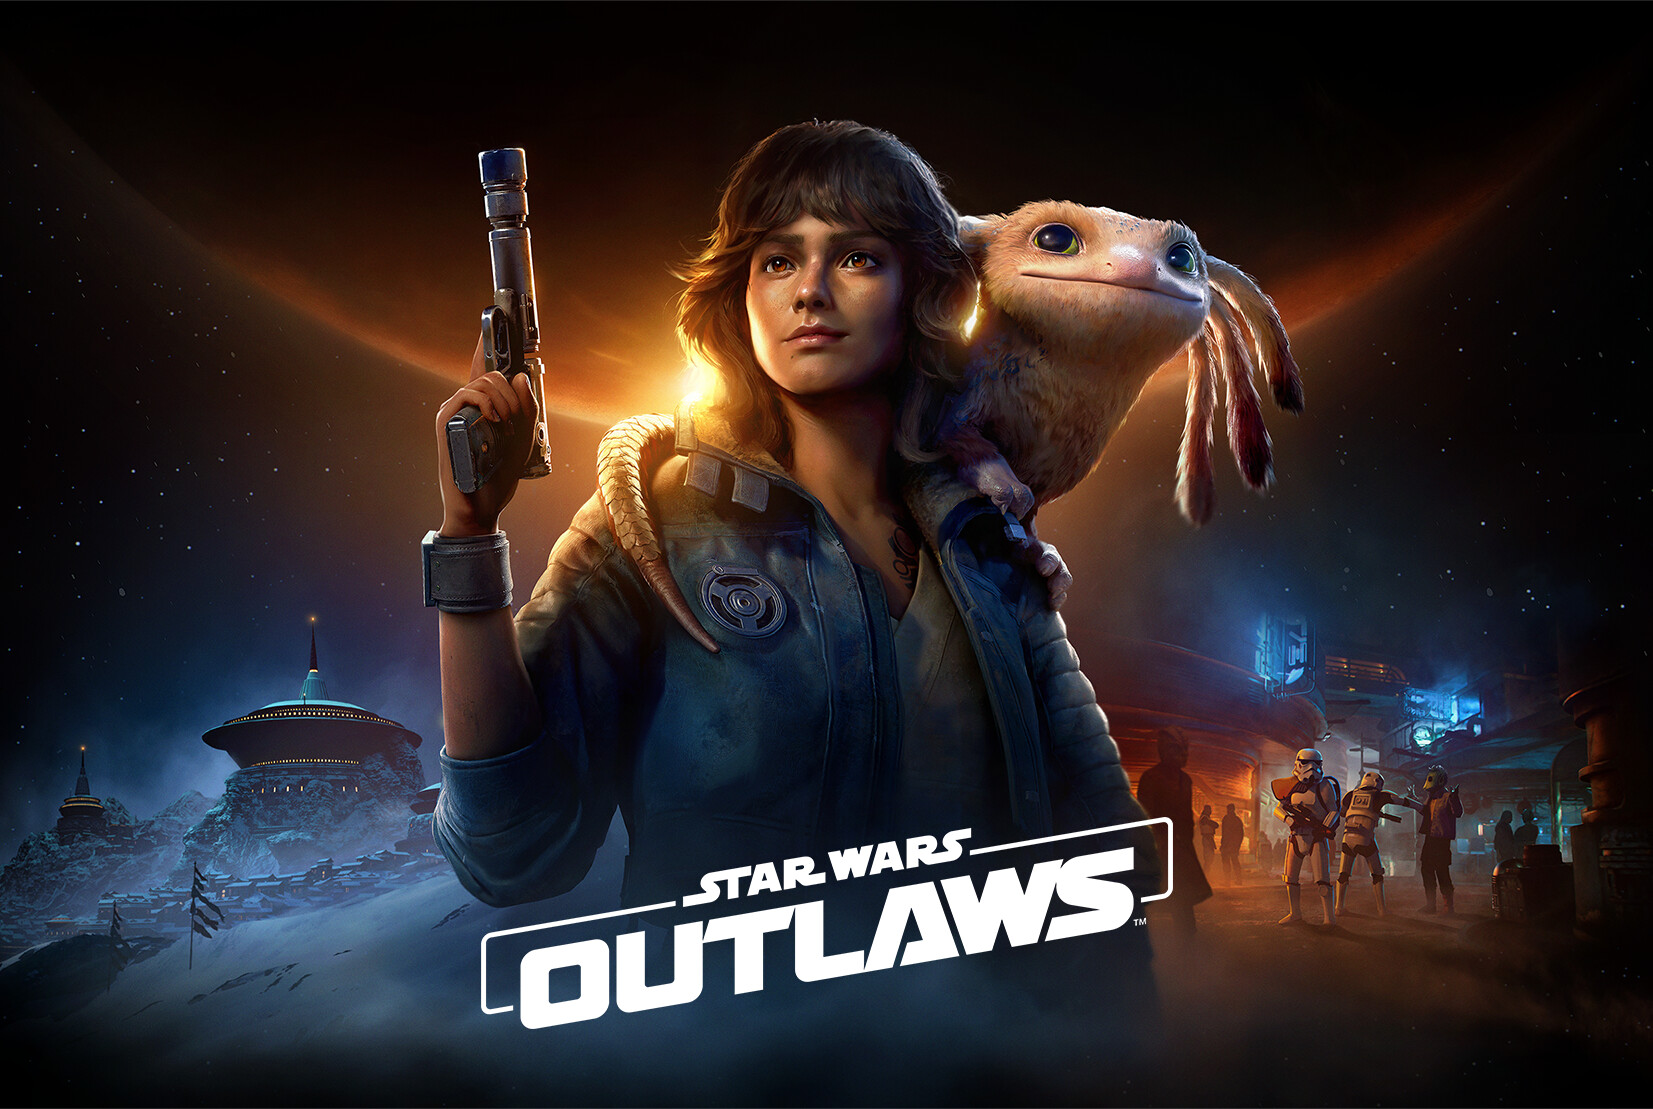 General 1653x1109 Star Wars: Outlaws Star Wars video game animals video game characters Ubisoft blaster Imperial Stormtrooper Kay Vess LucasFilm gun smiling looking away stars